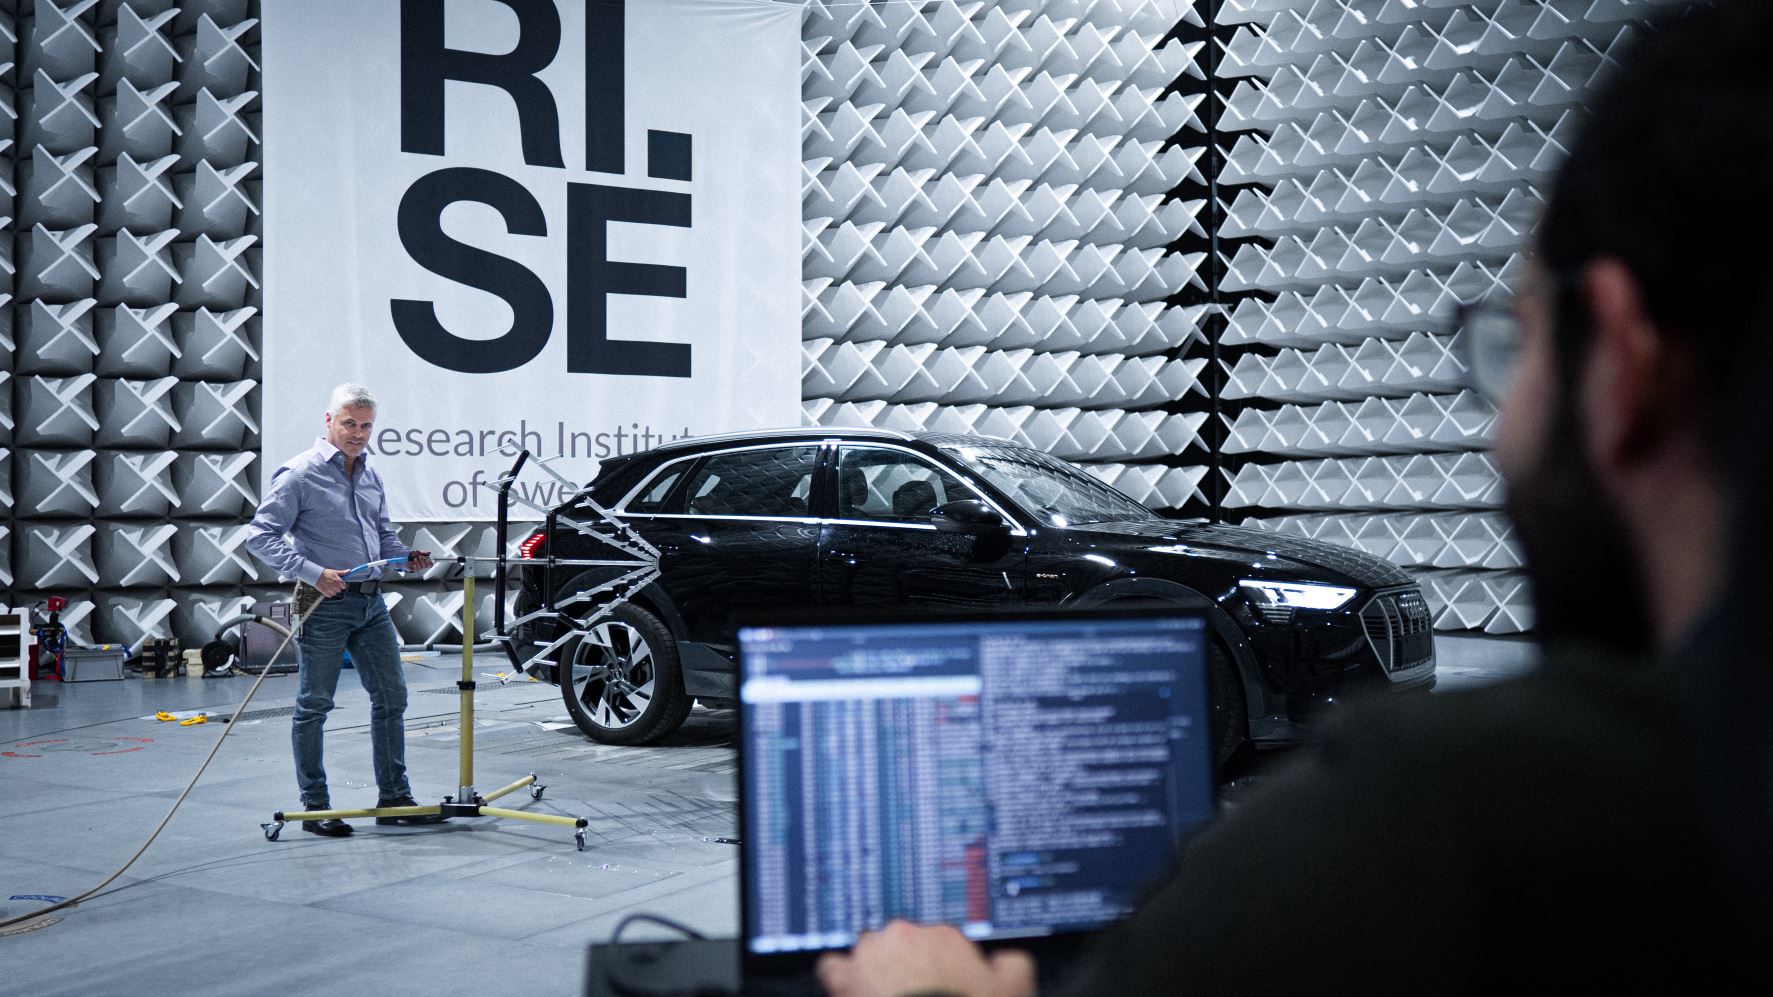 Advanced Hub for Automotive Cyber Security